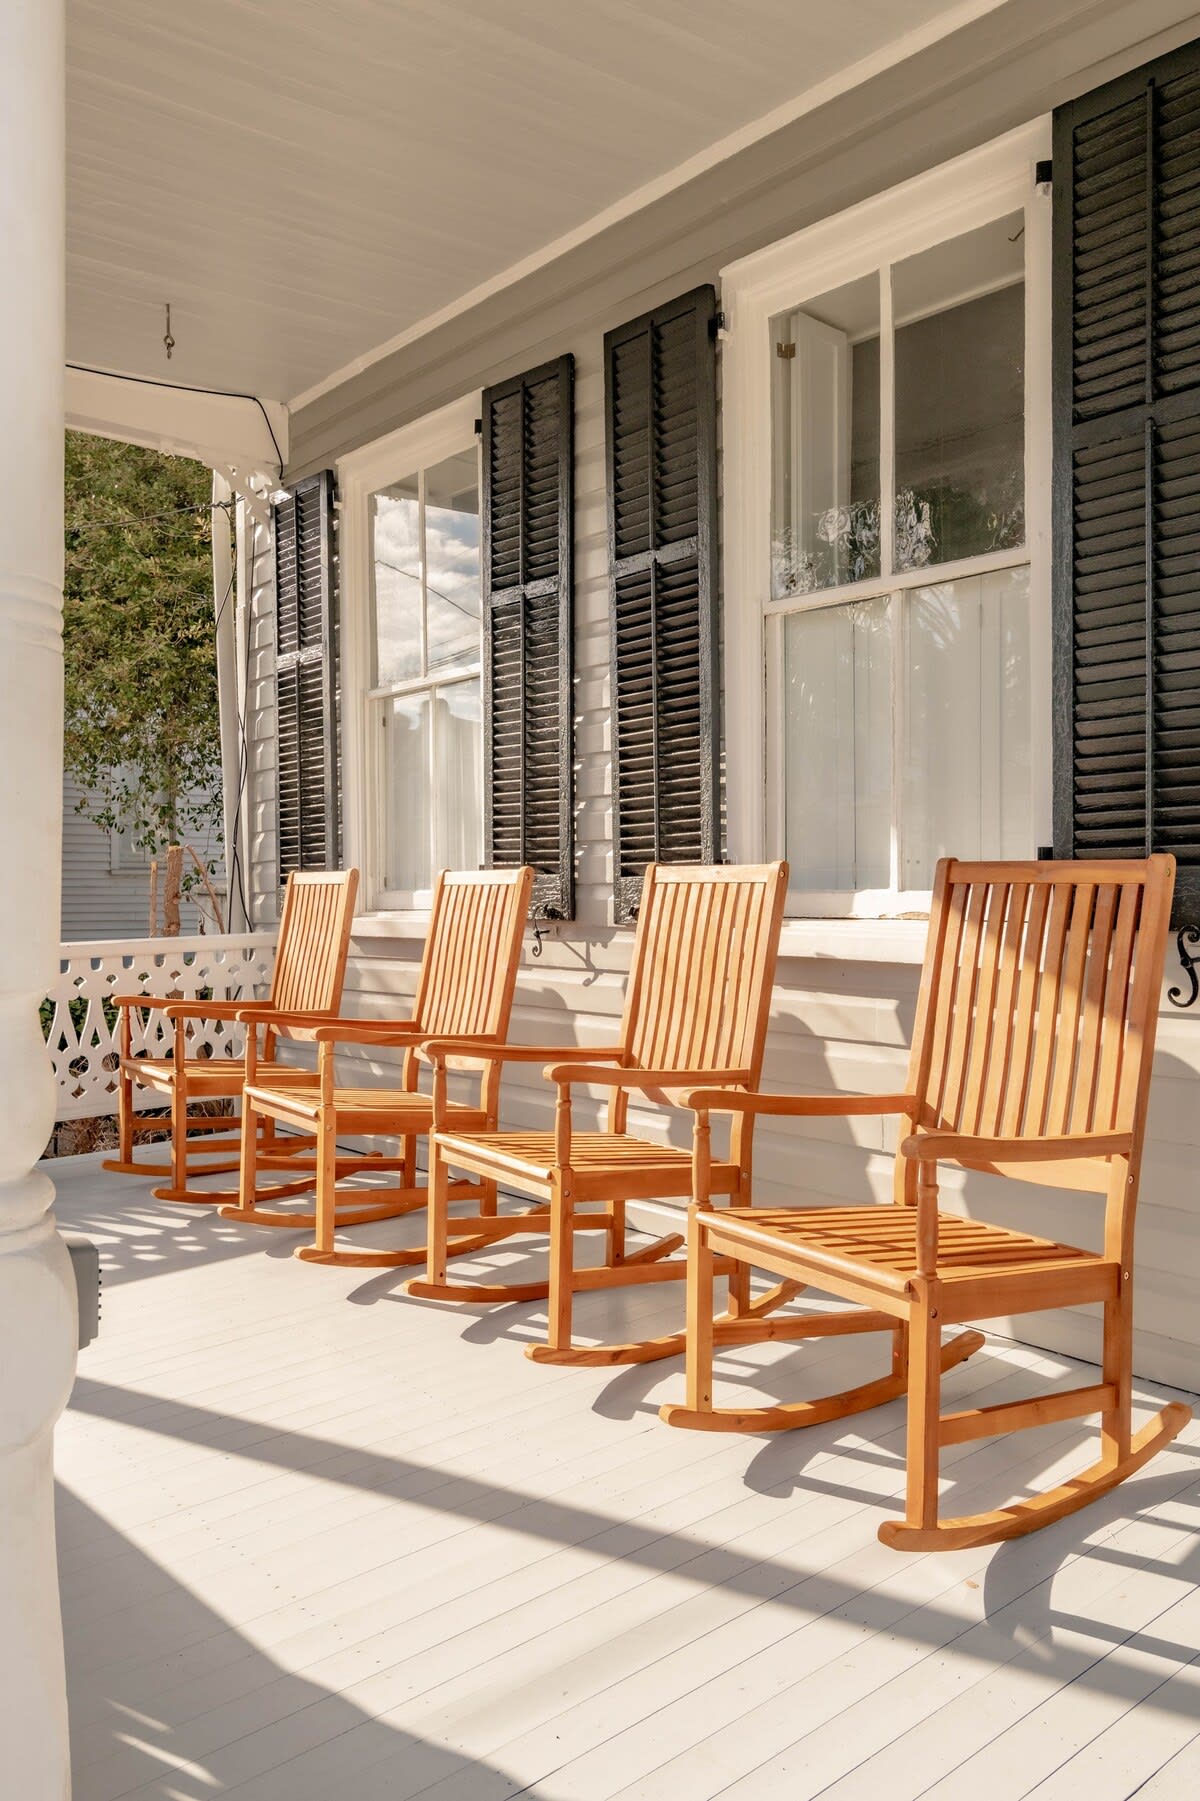 Large front porch with seating for your group